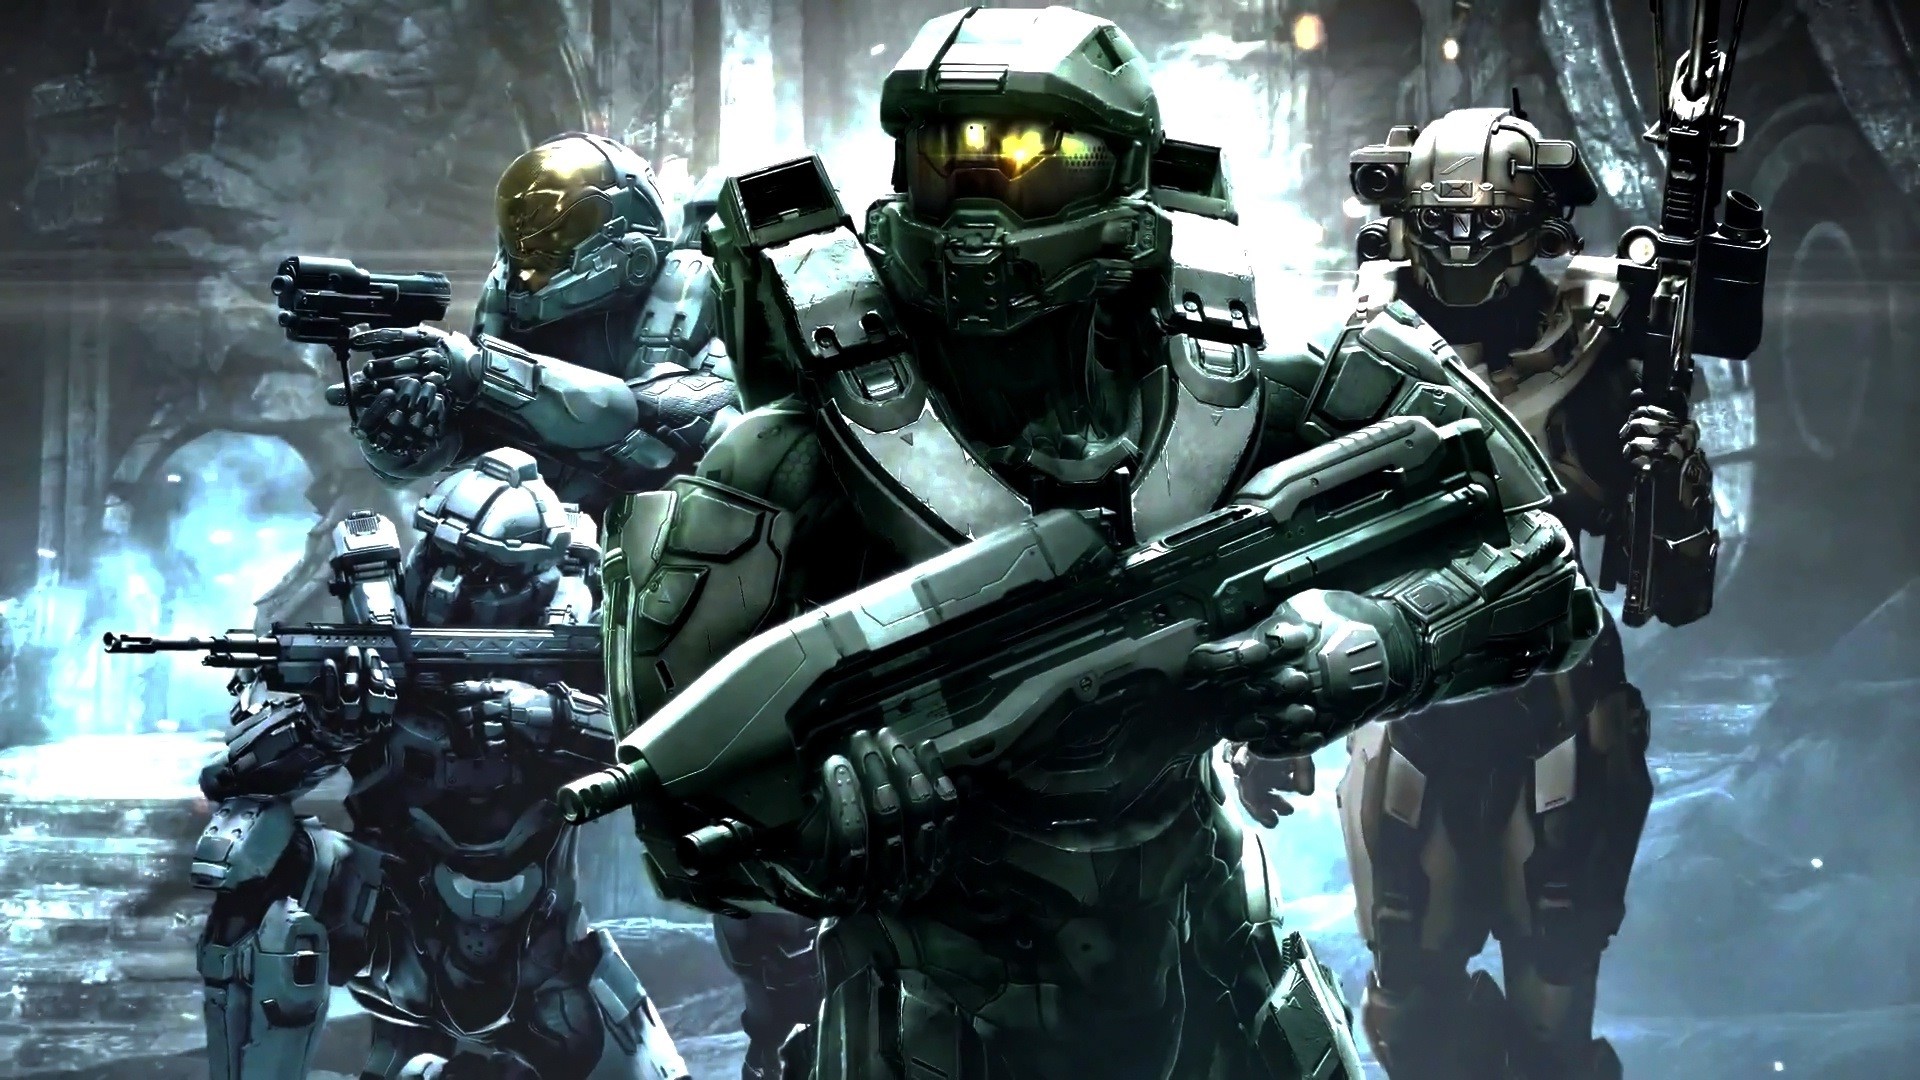 1920x1080 ... Halo 5 Master Chief Wallpapers For Laptops 1